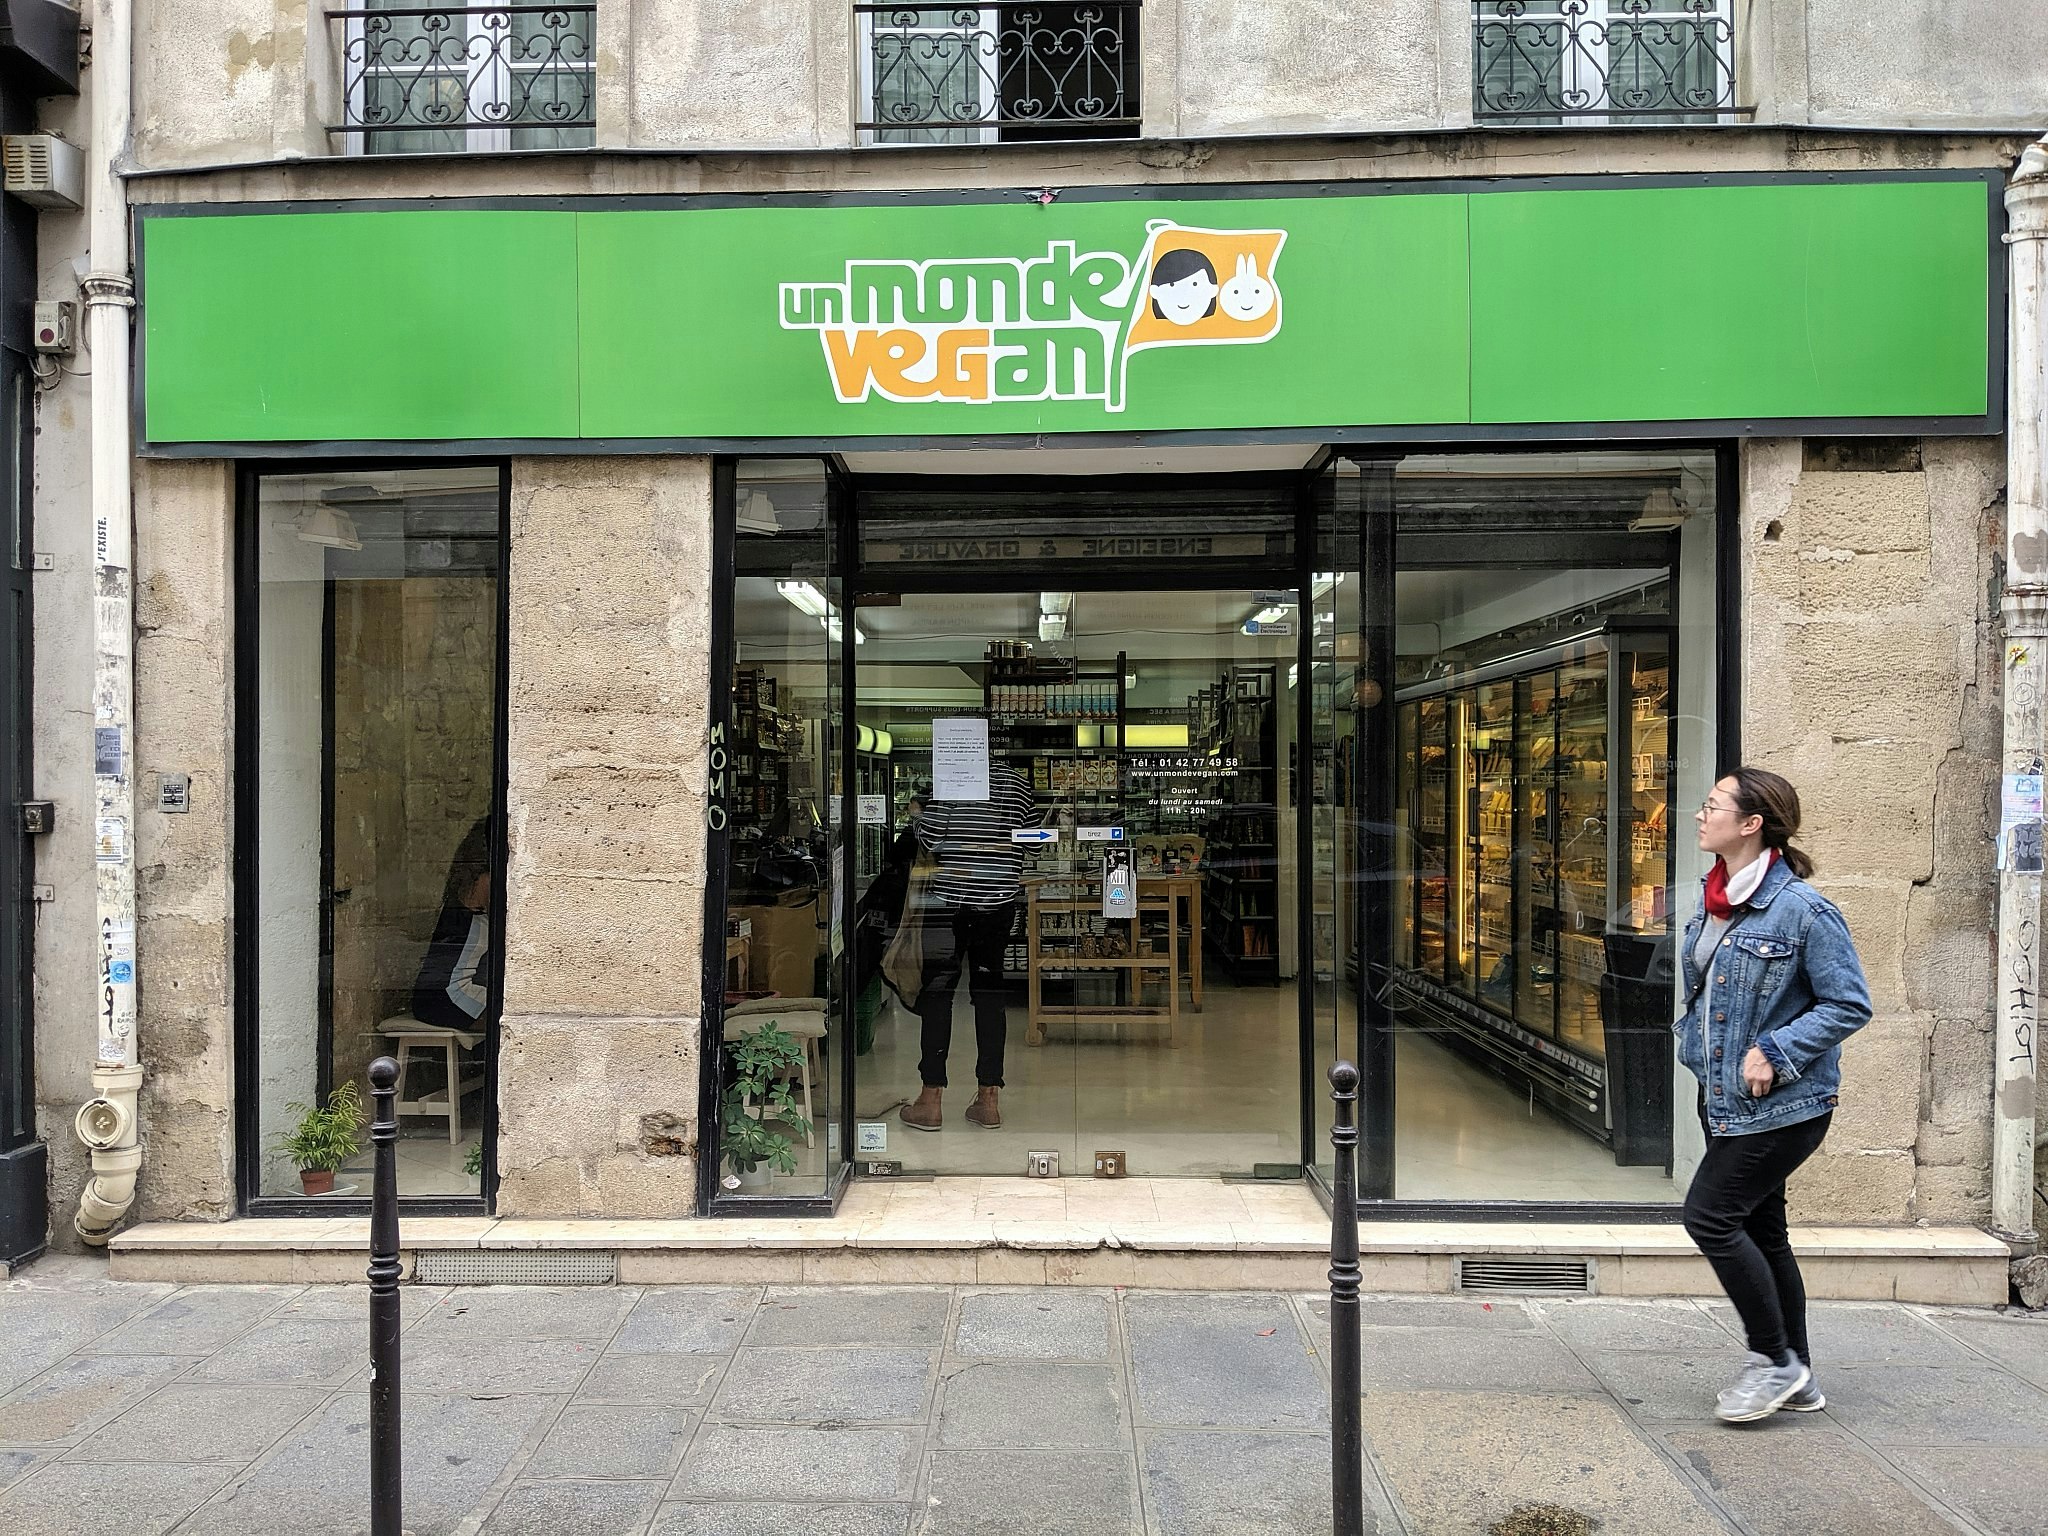 A woman walks past in a shop housed in a historic stone building; a green sign says Un Monde Vegan. 